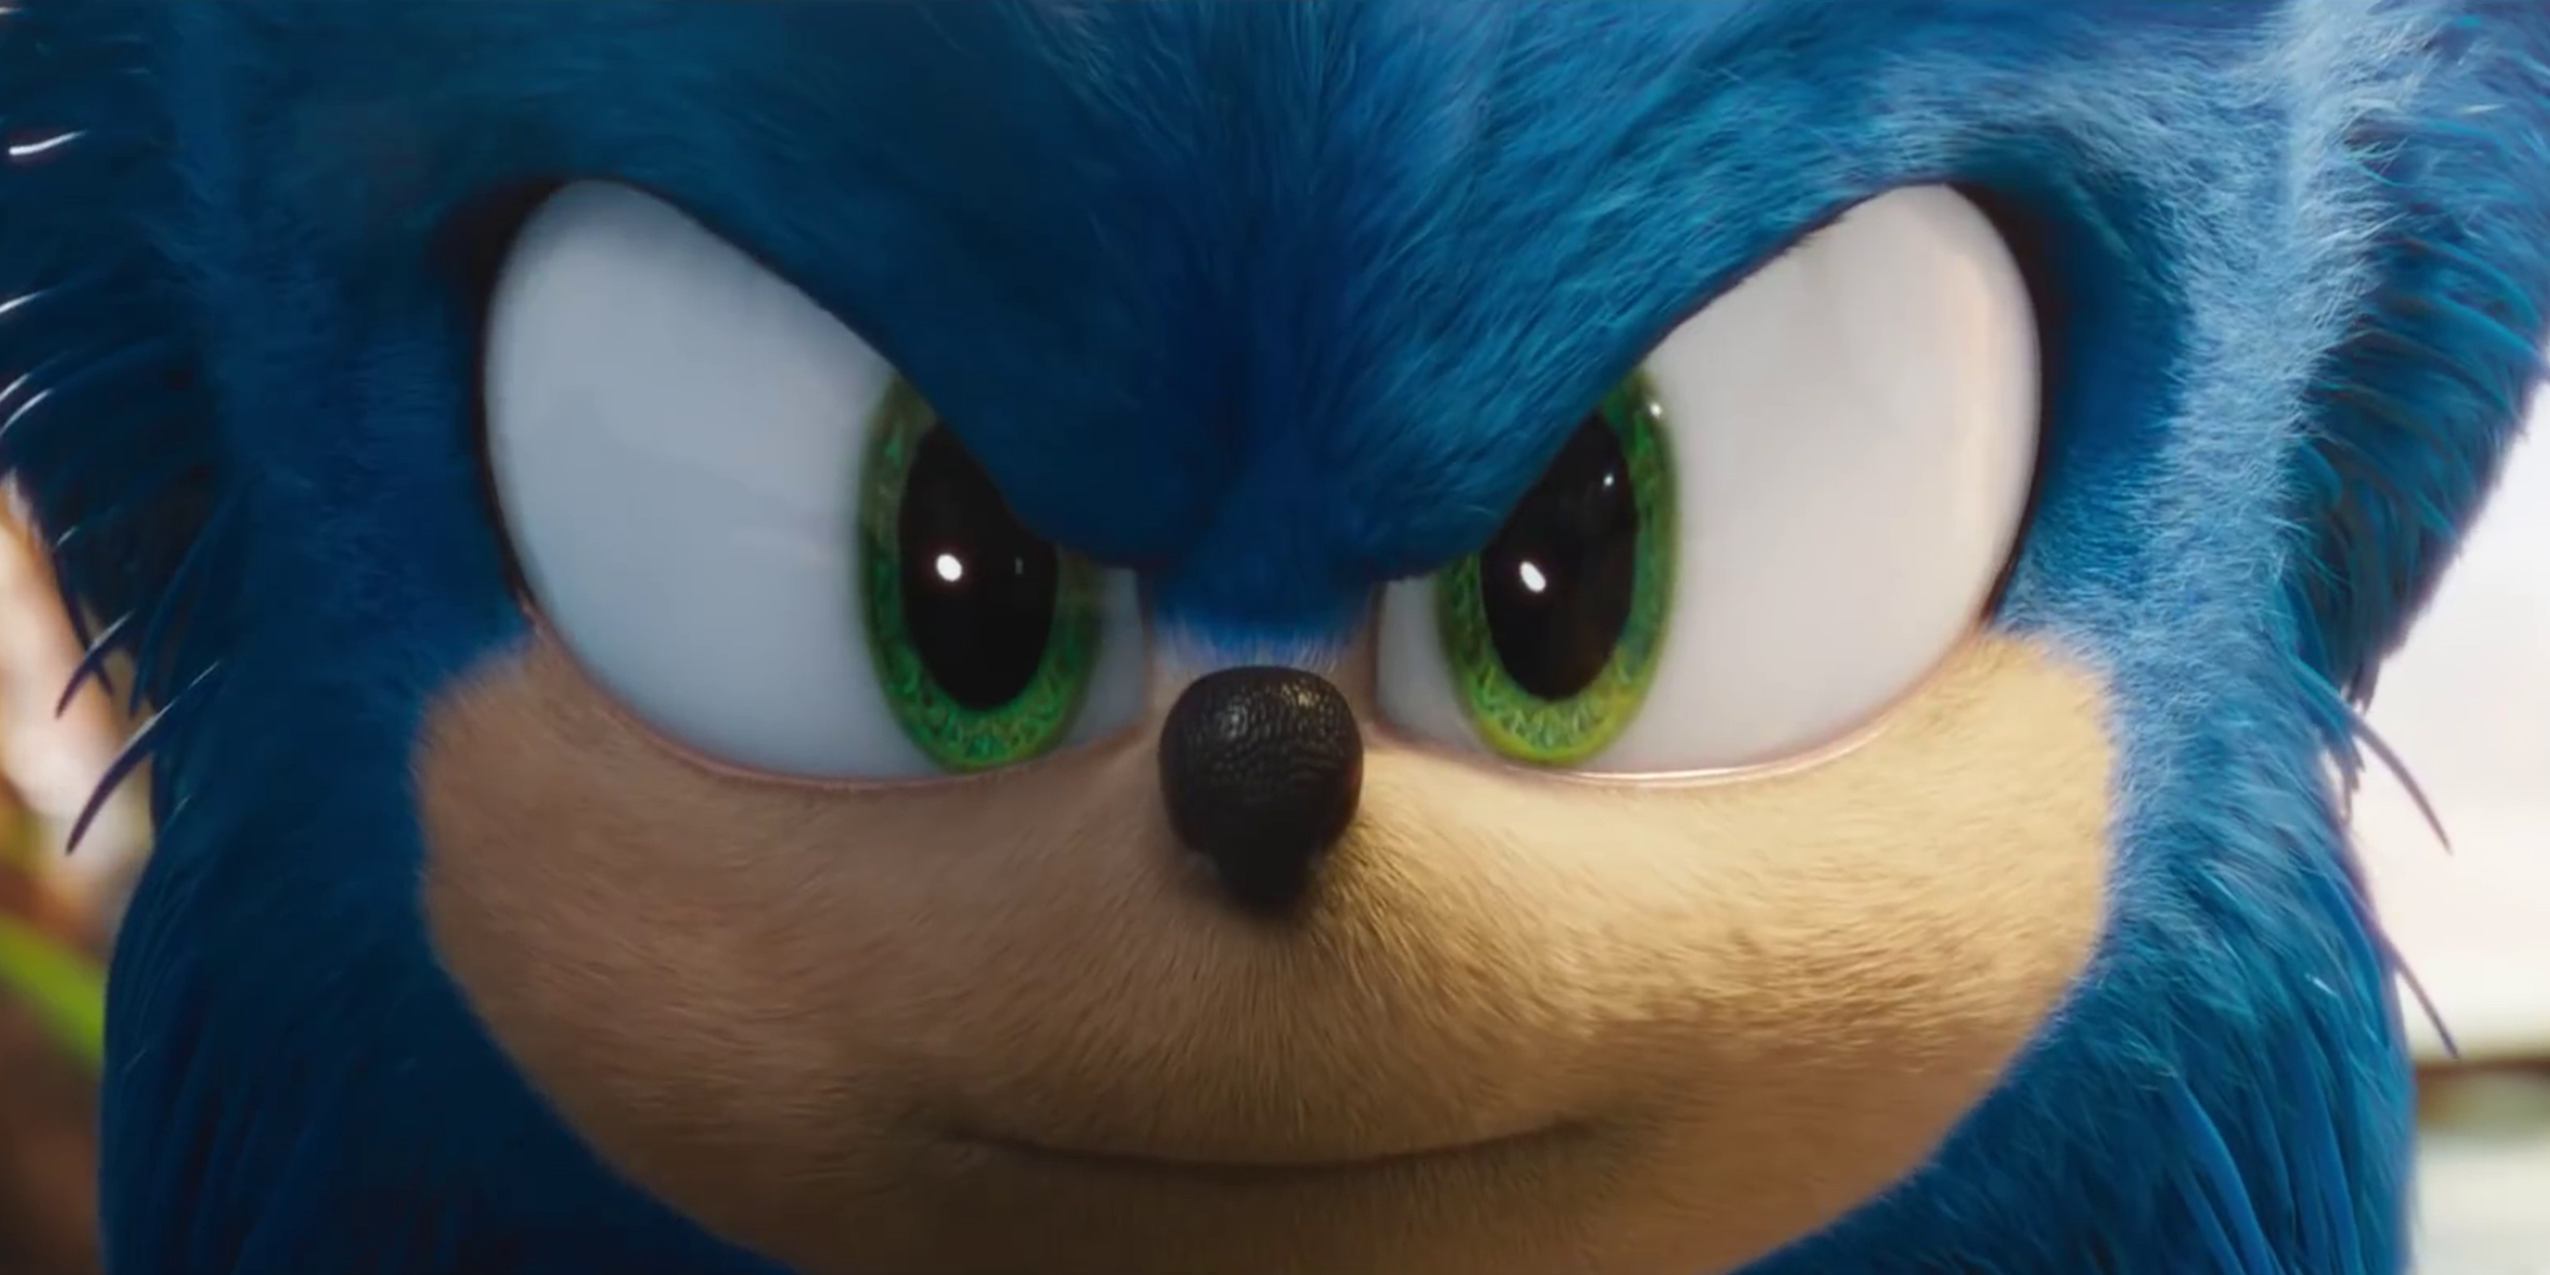 sonic the hedgehog 2 trailer unveiled at the game awards